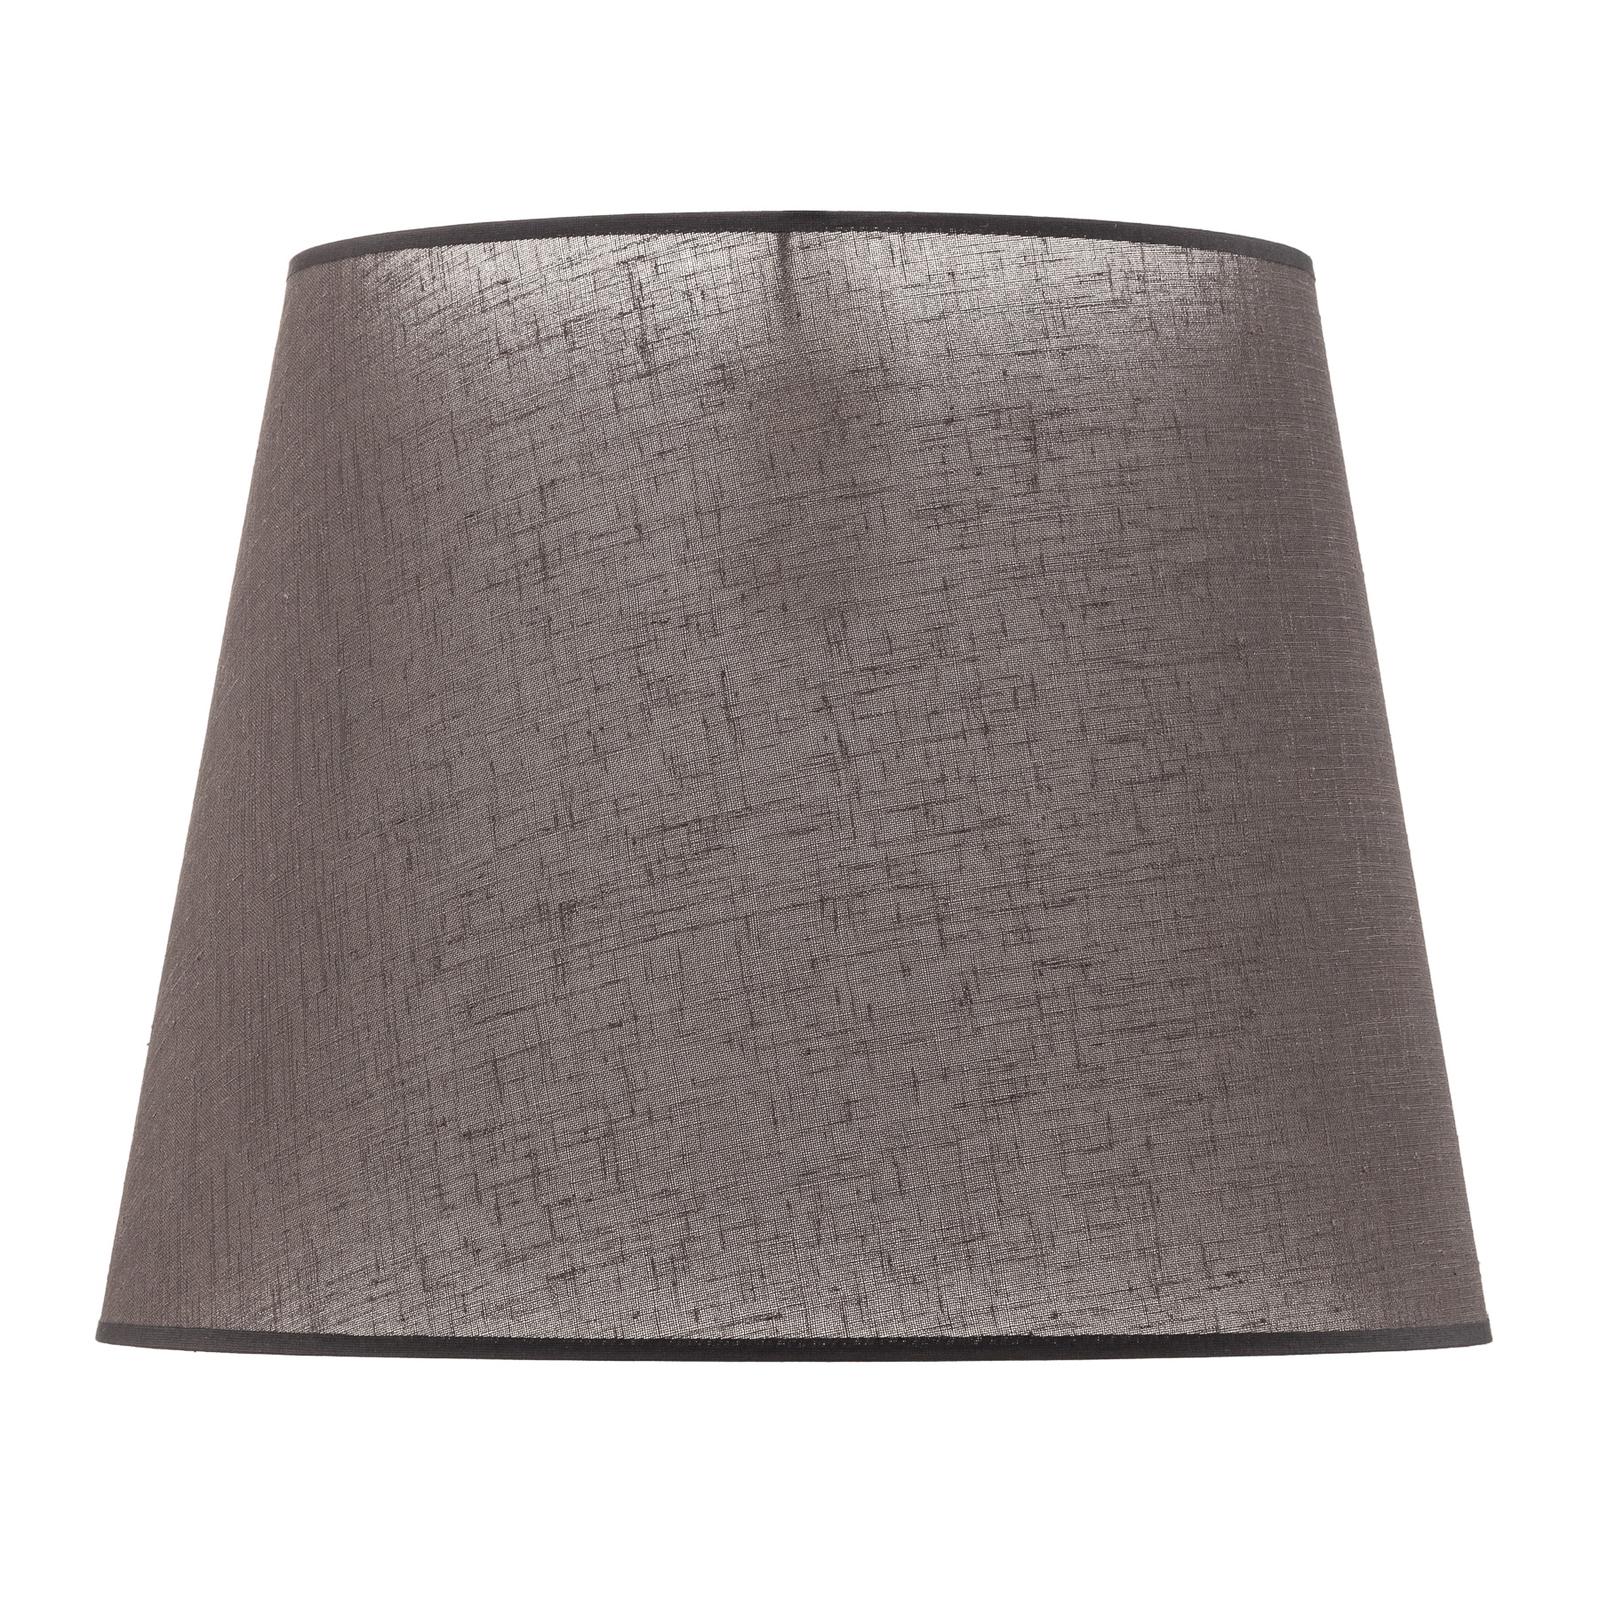 Classic L lampshade for pendant lights, graphite